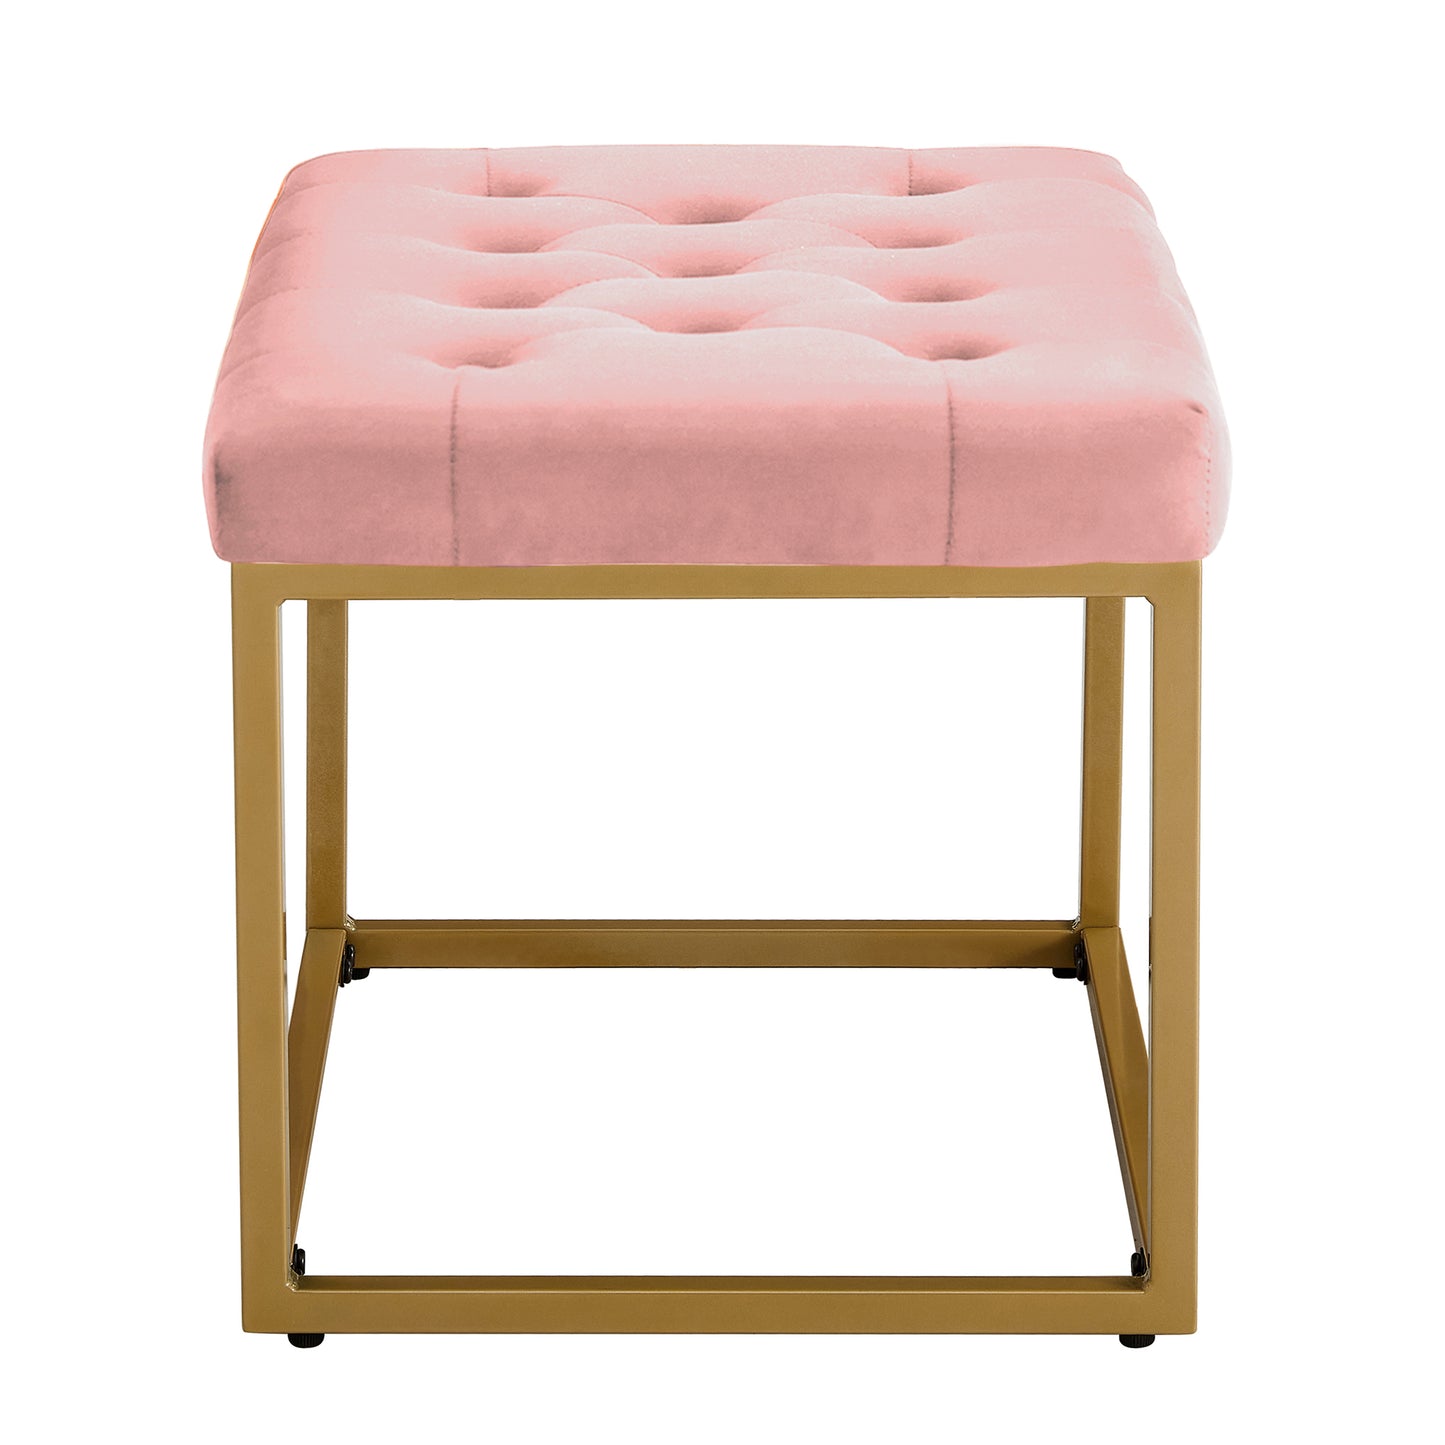 Velvet Shoe Changing Stool, Footstool, Square Cushion Foot Stool, Sofa stool, Rest stool,Low Stool .Step Stool, Small Footrest .Suitable for Clothes Shop,Living Room,Fitting Room.Pink BenchST-001